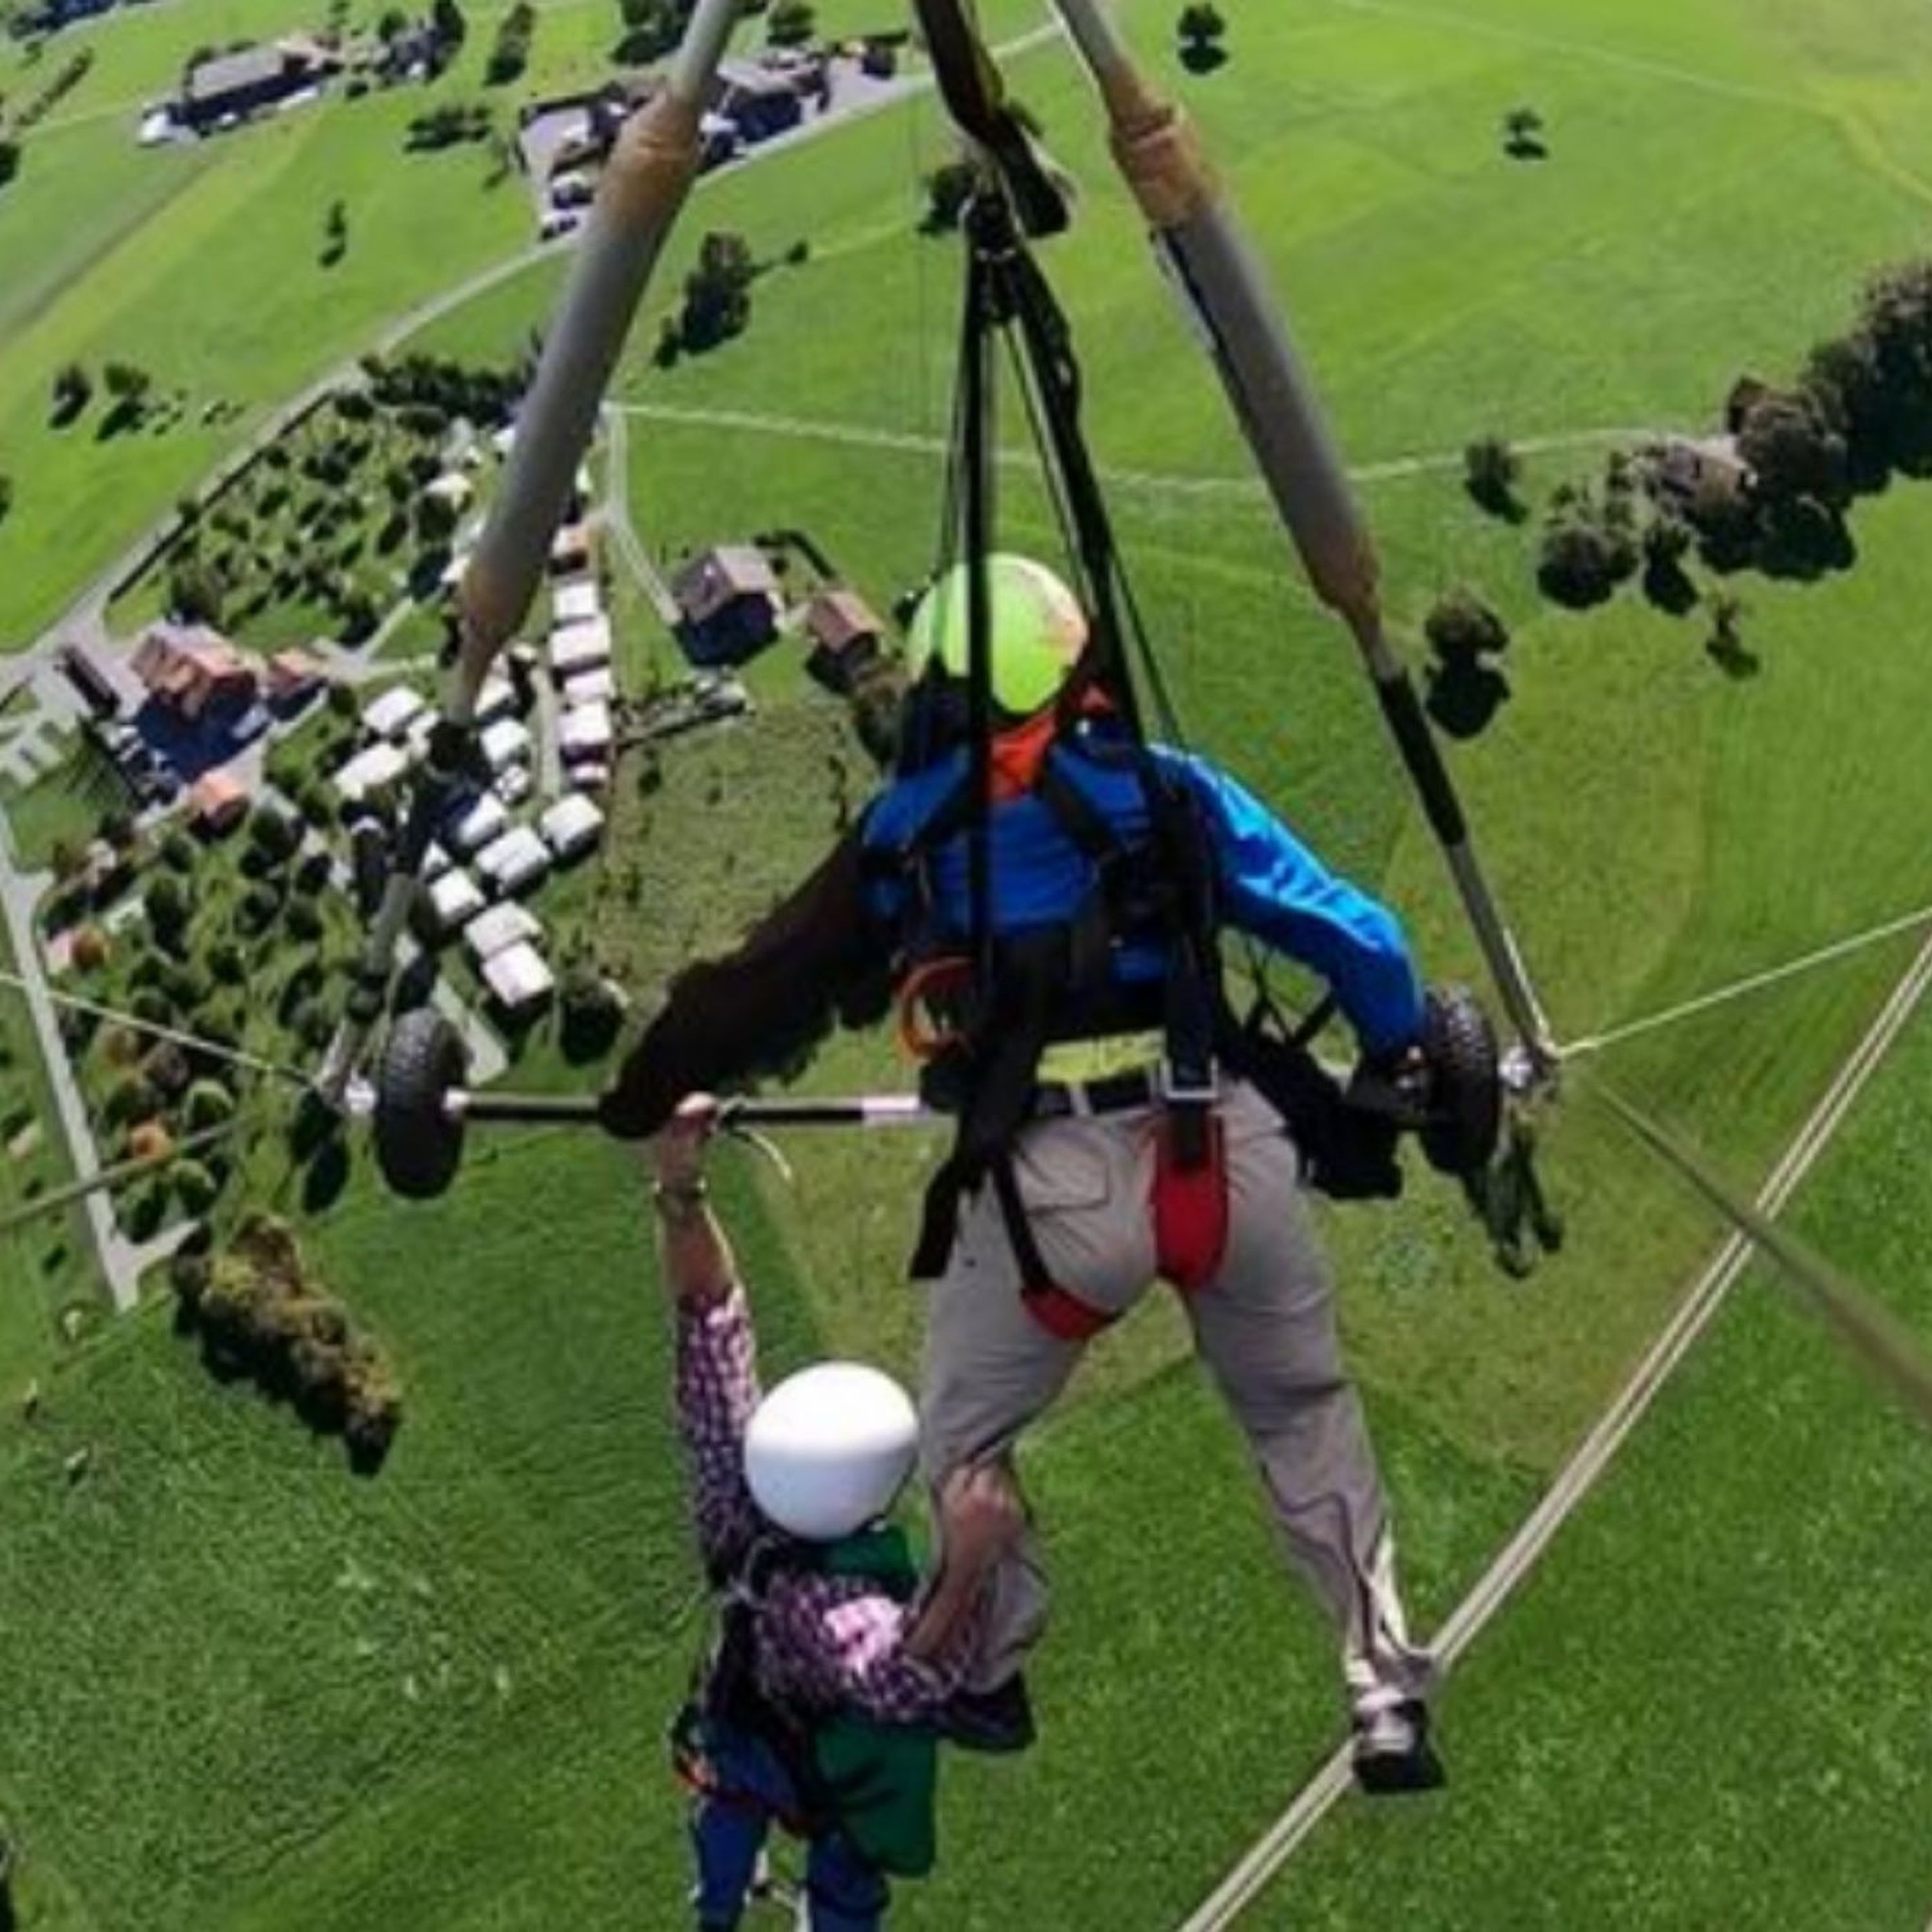 Hang-gliding horror: ”I wasn’t attached!”